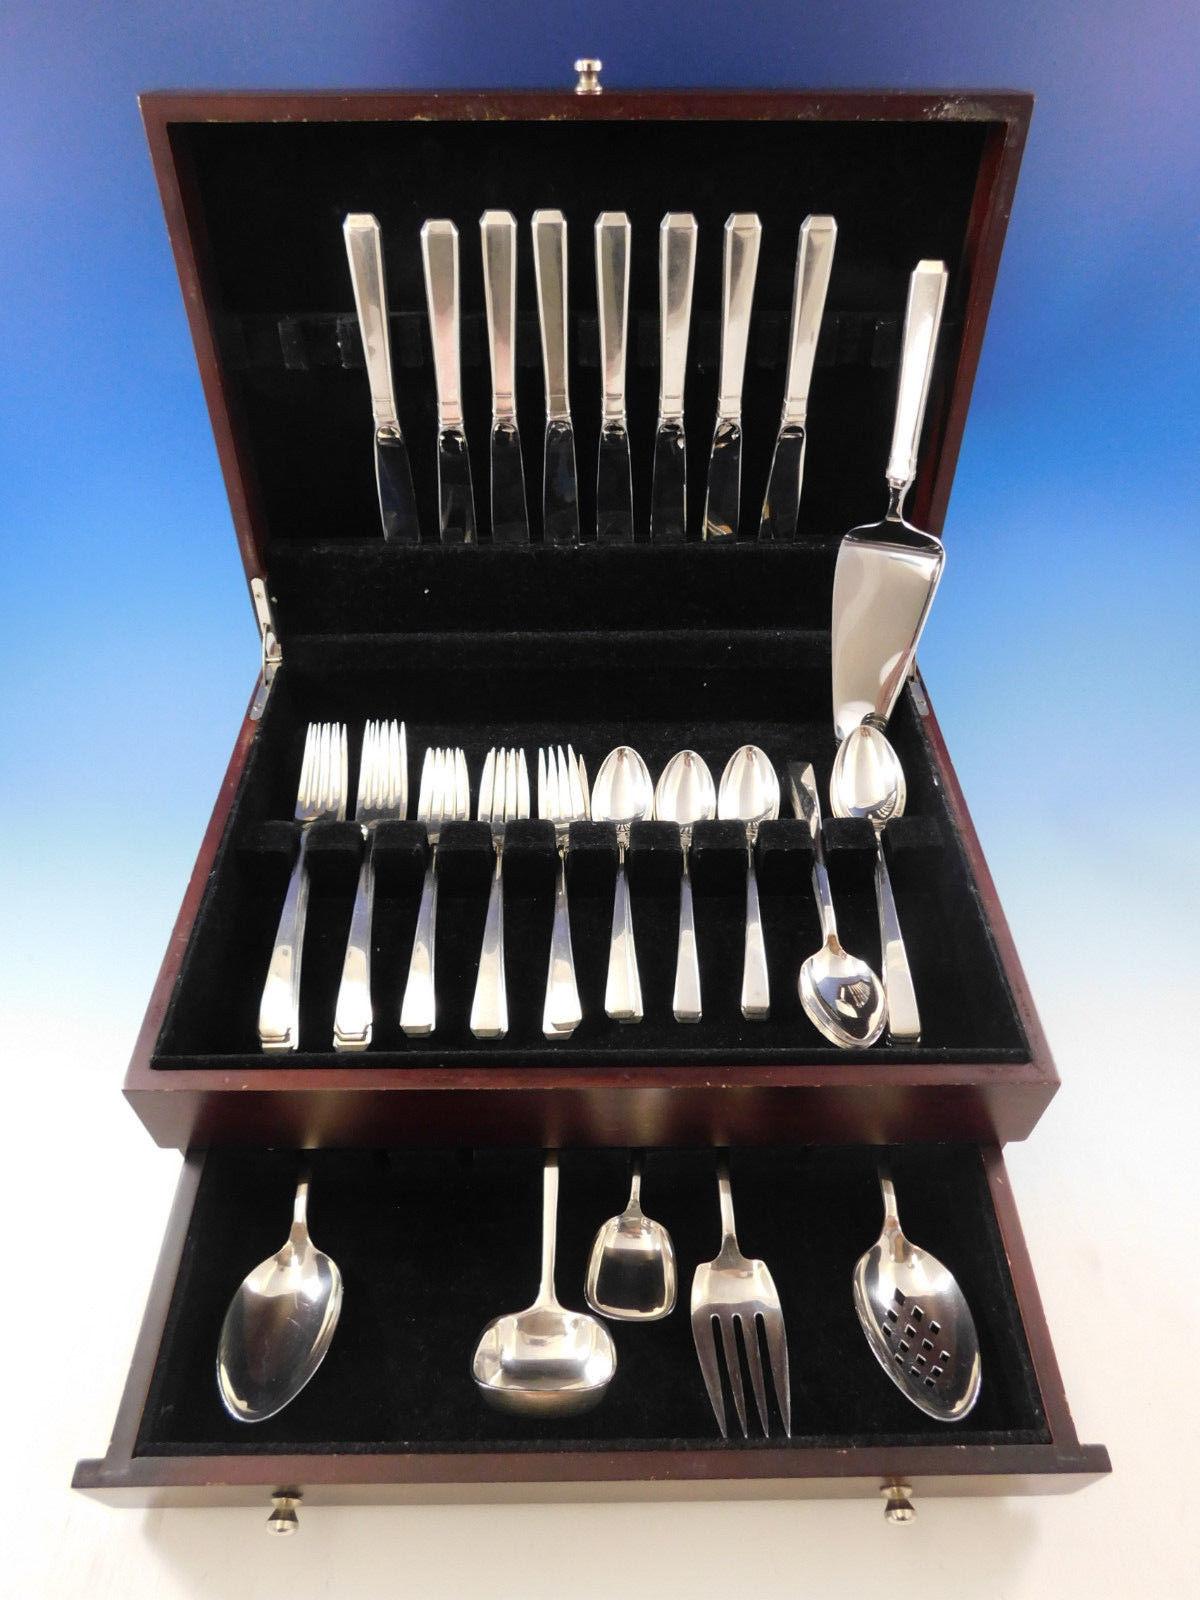 Craftsman by Towle sterling silver flatware set, 46 pieces. This set includes:

Eight knives, 8 5/8